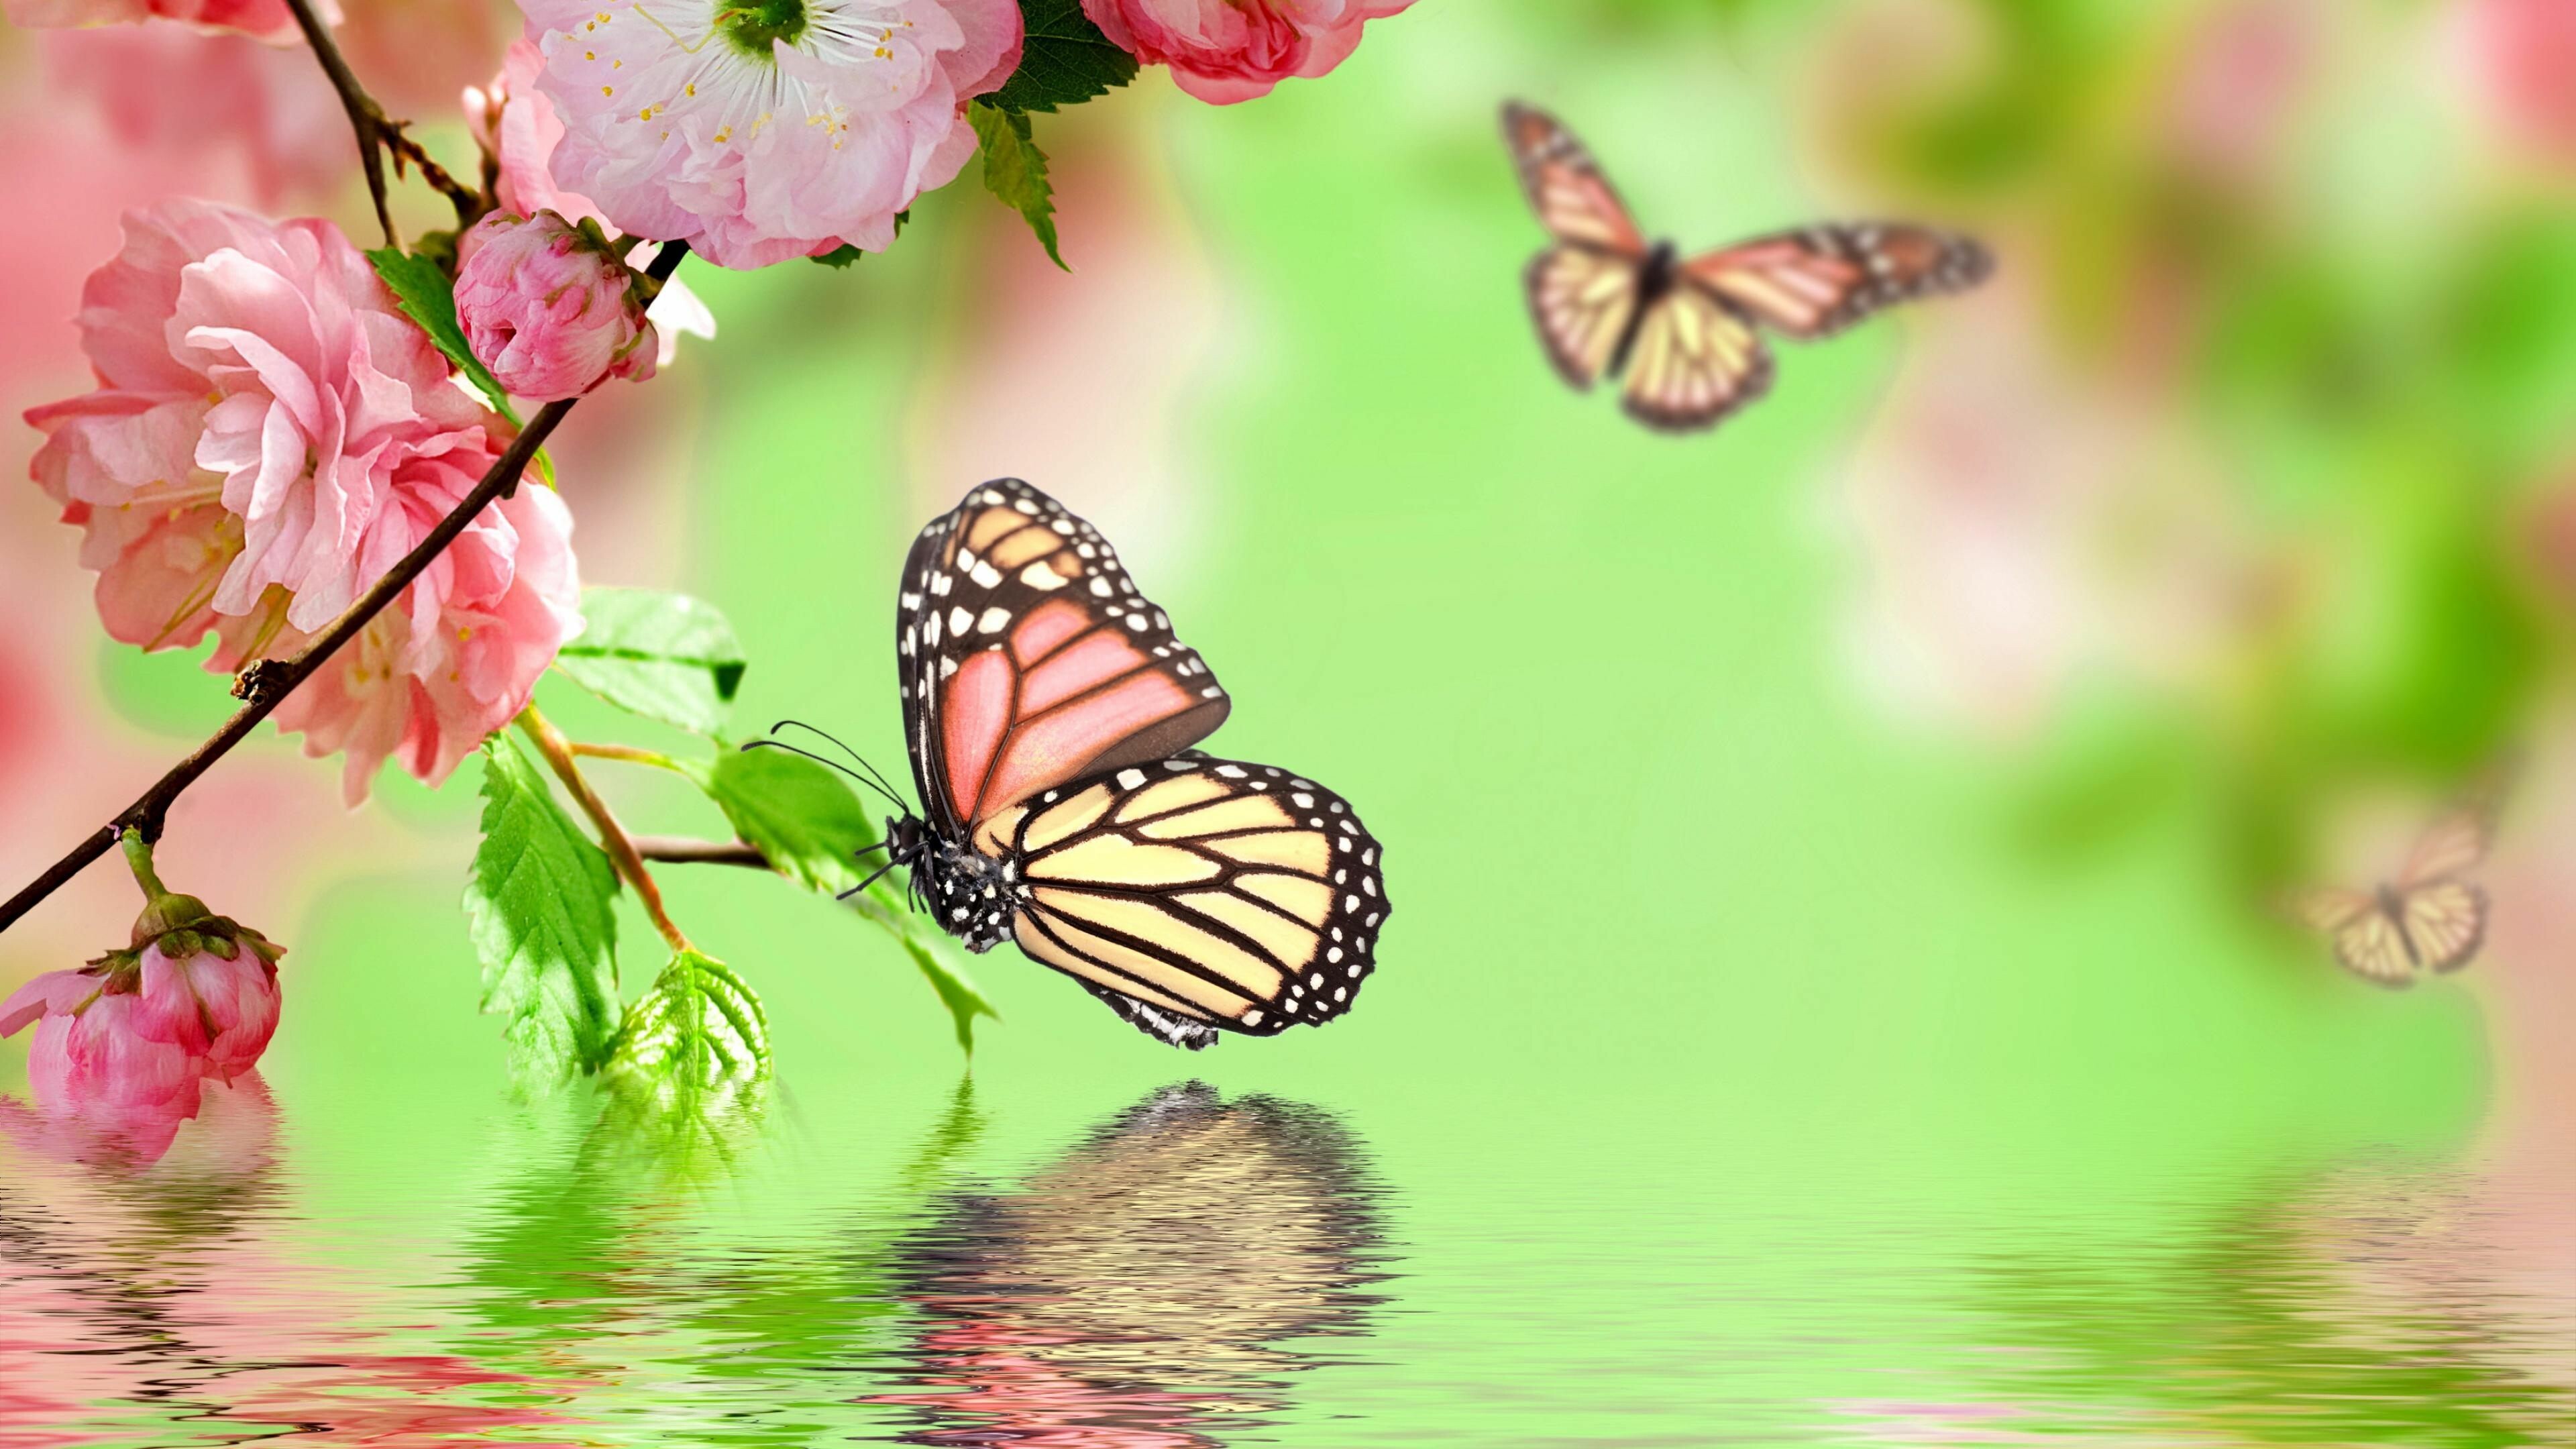 47+ Butterfly Garden Wallpapers: HD, 4K, 5K for PC and Mobile | Download  free images for iPhone, Android